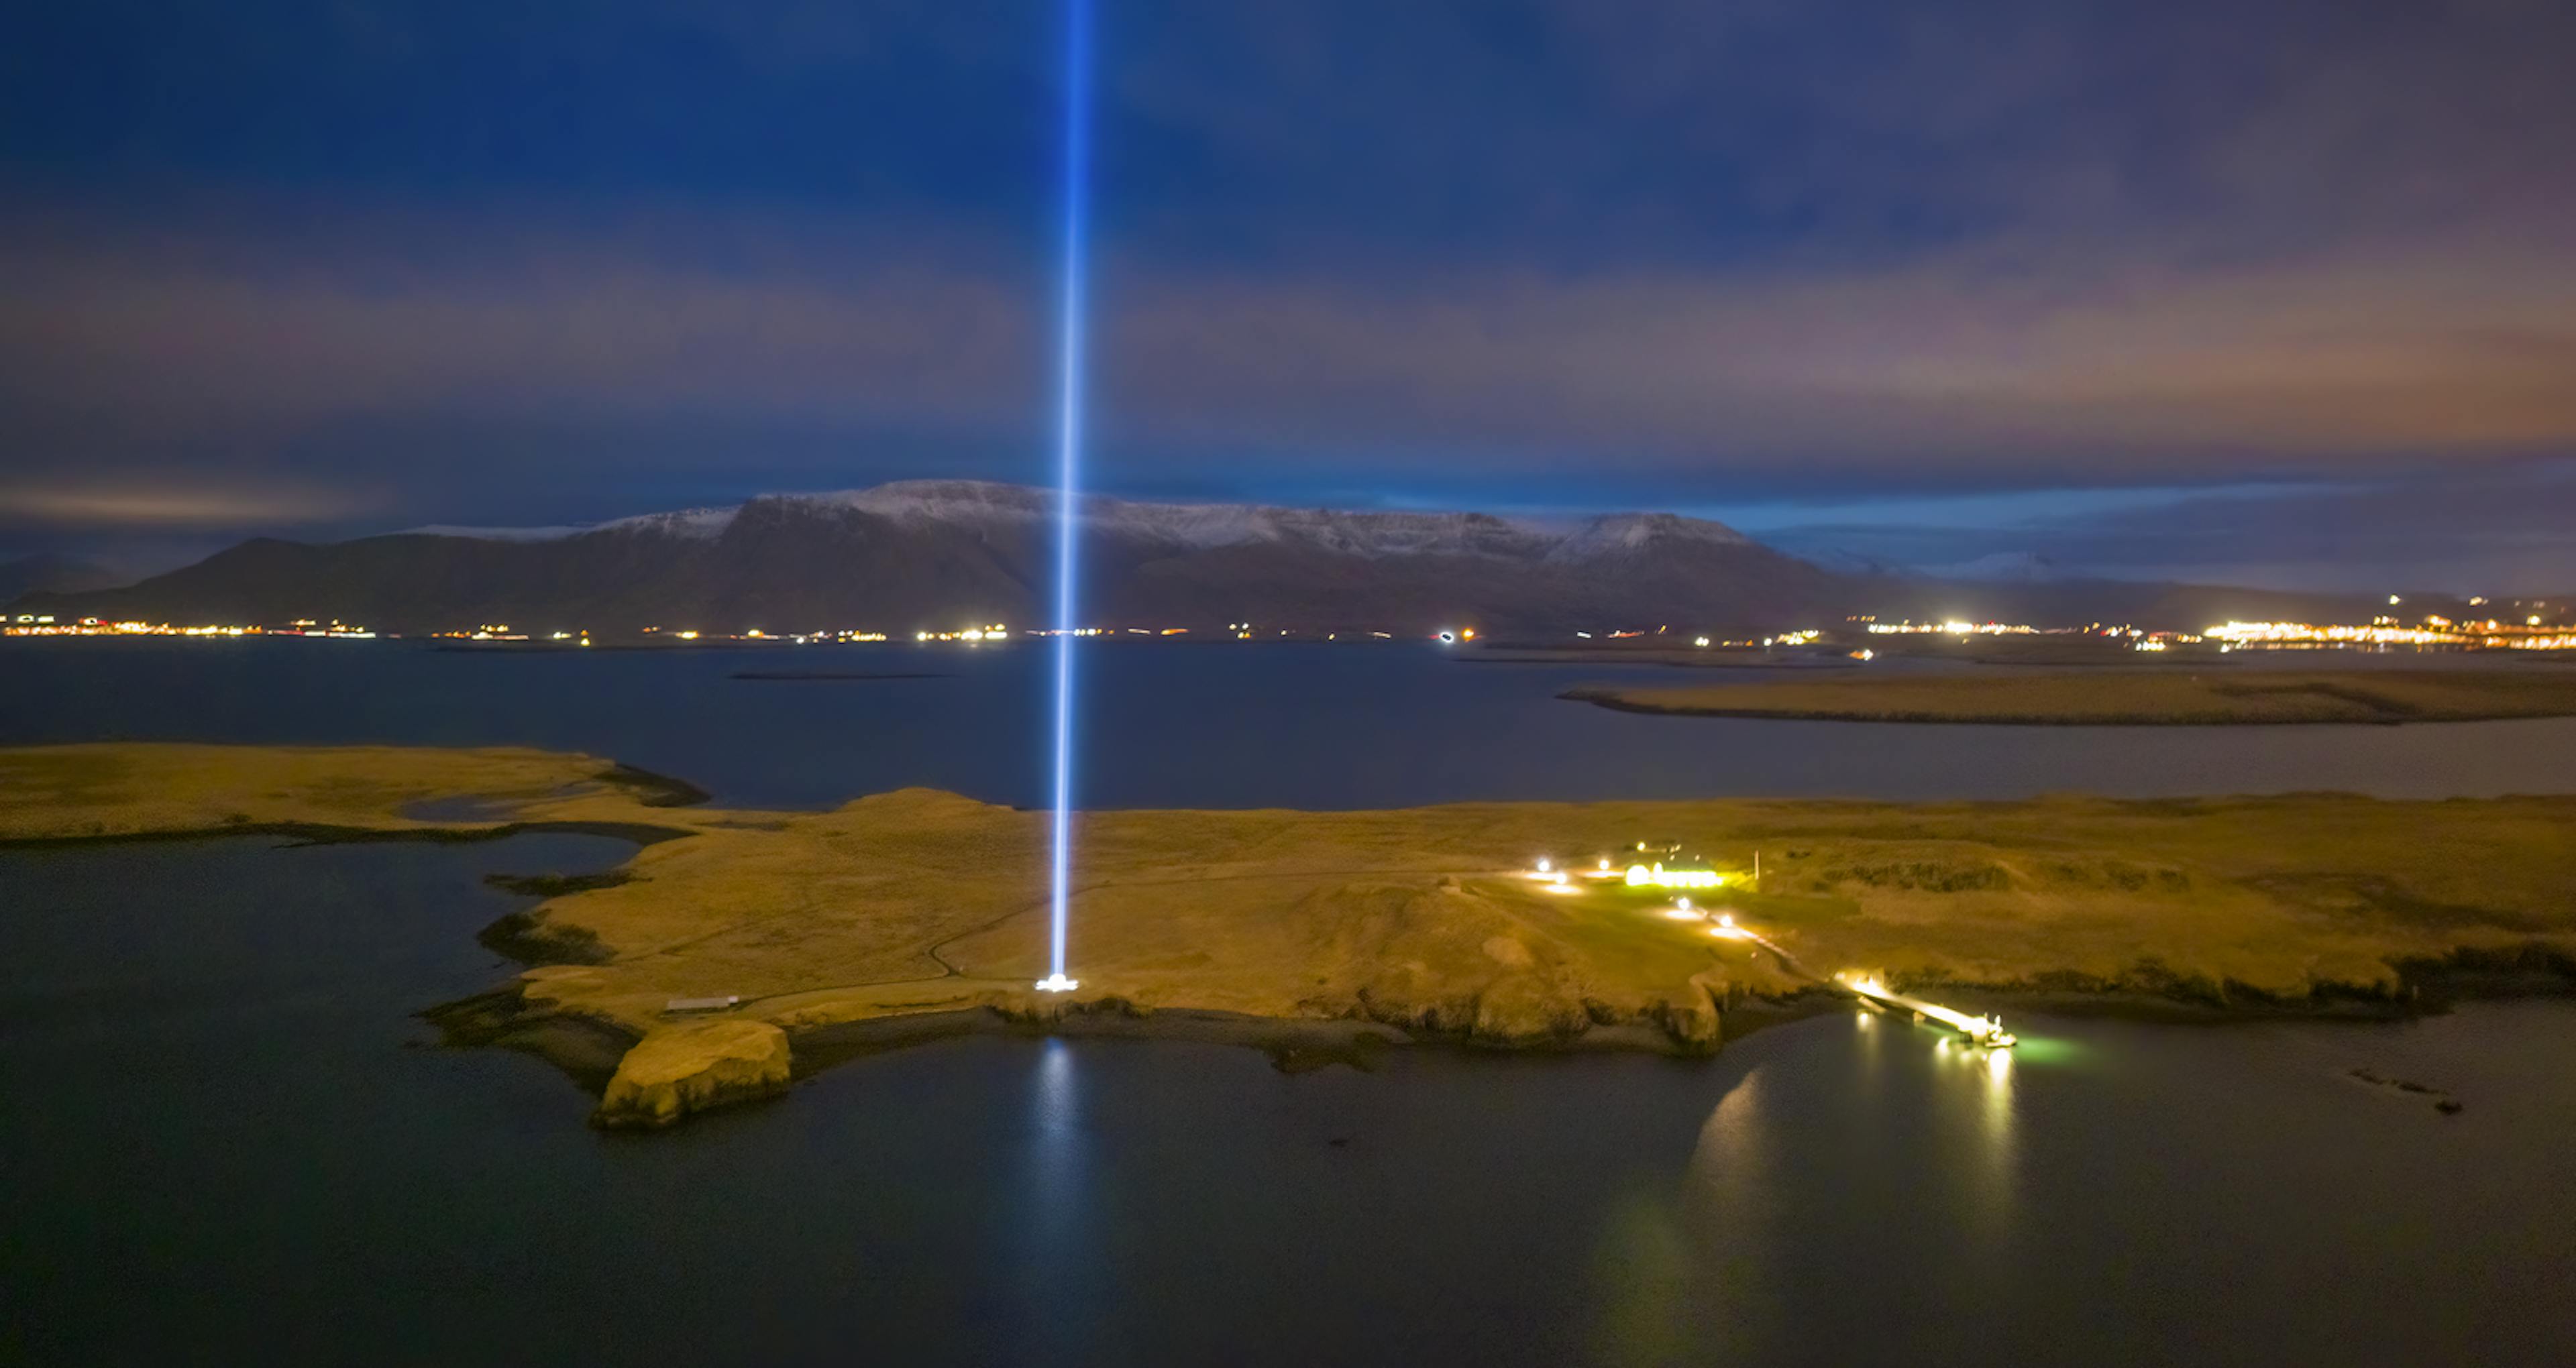 The imagine peace tower in Viðey